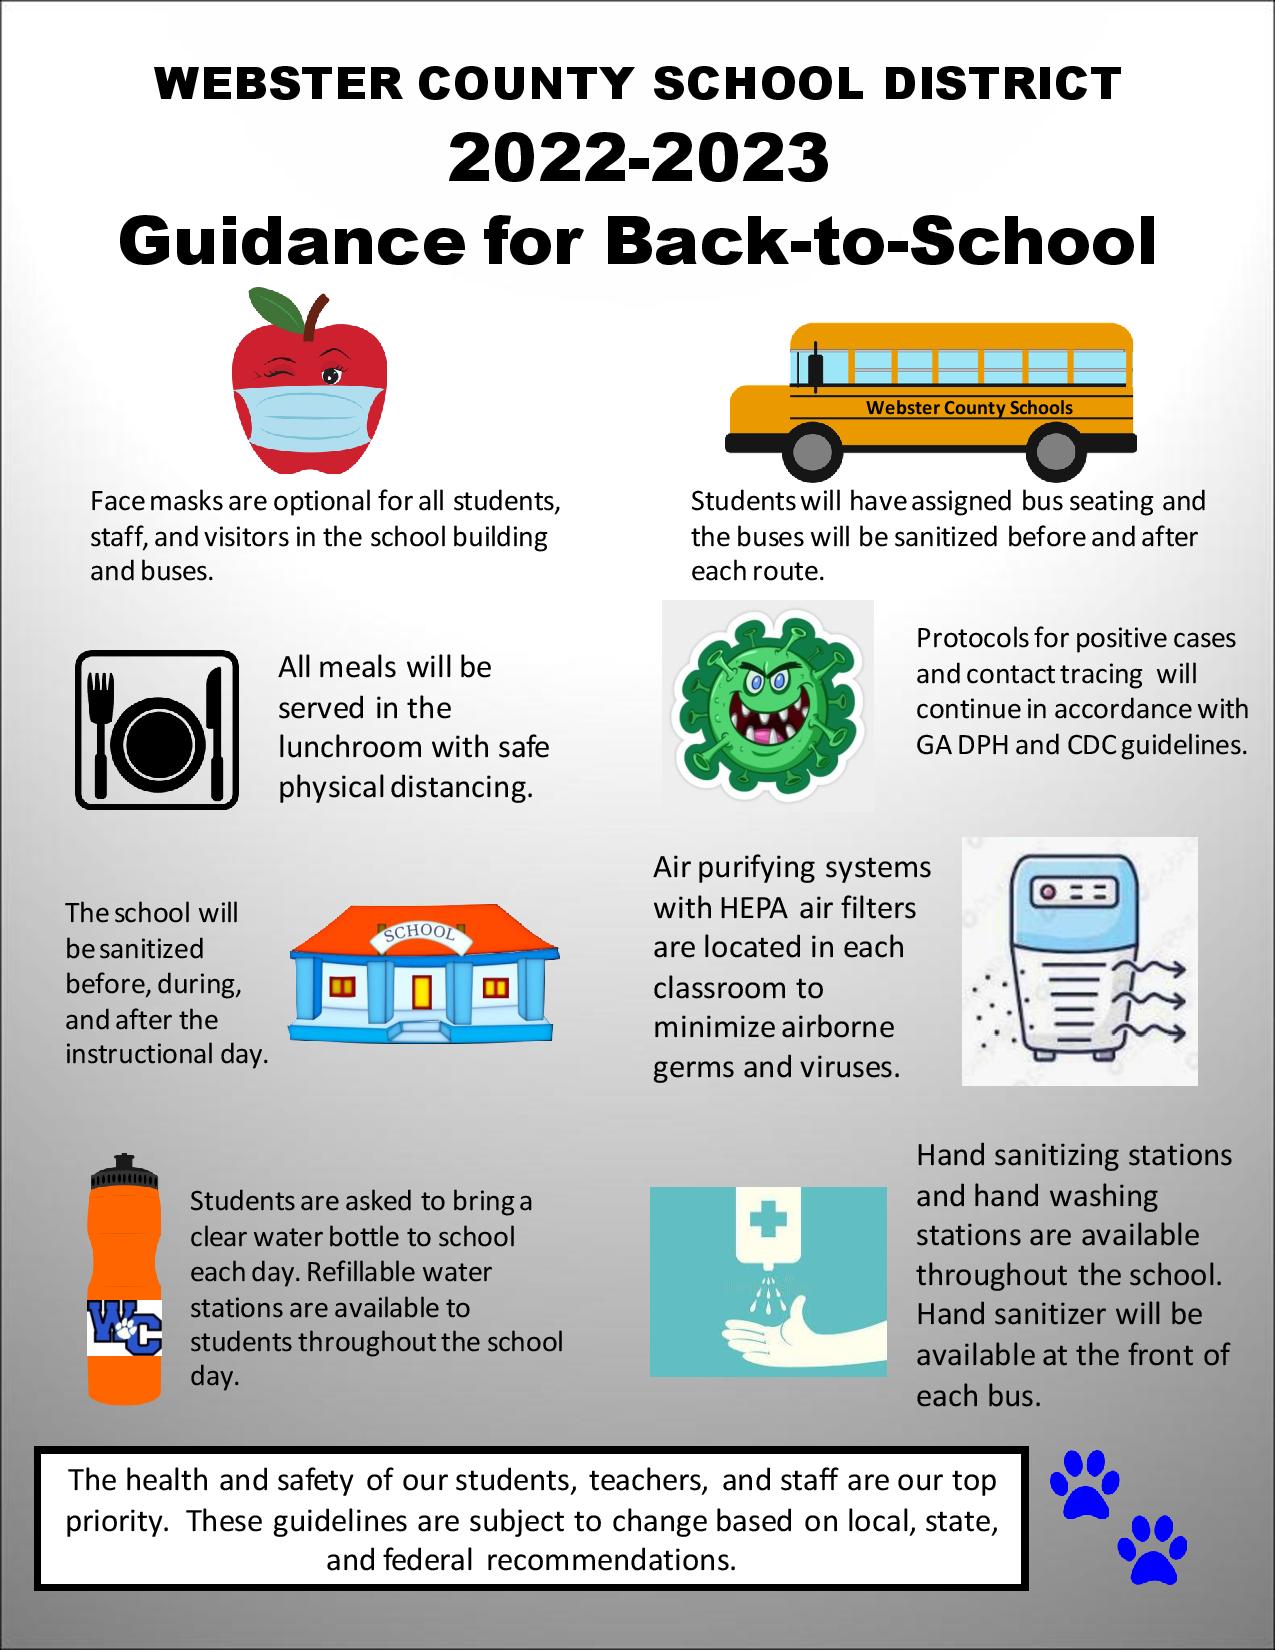 Webster s Back to School COVID Guidance 2023-2022 